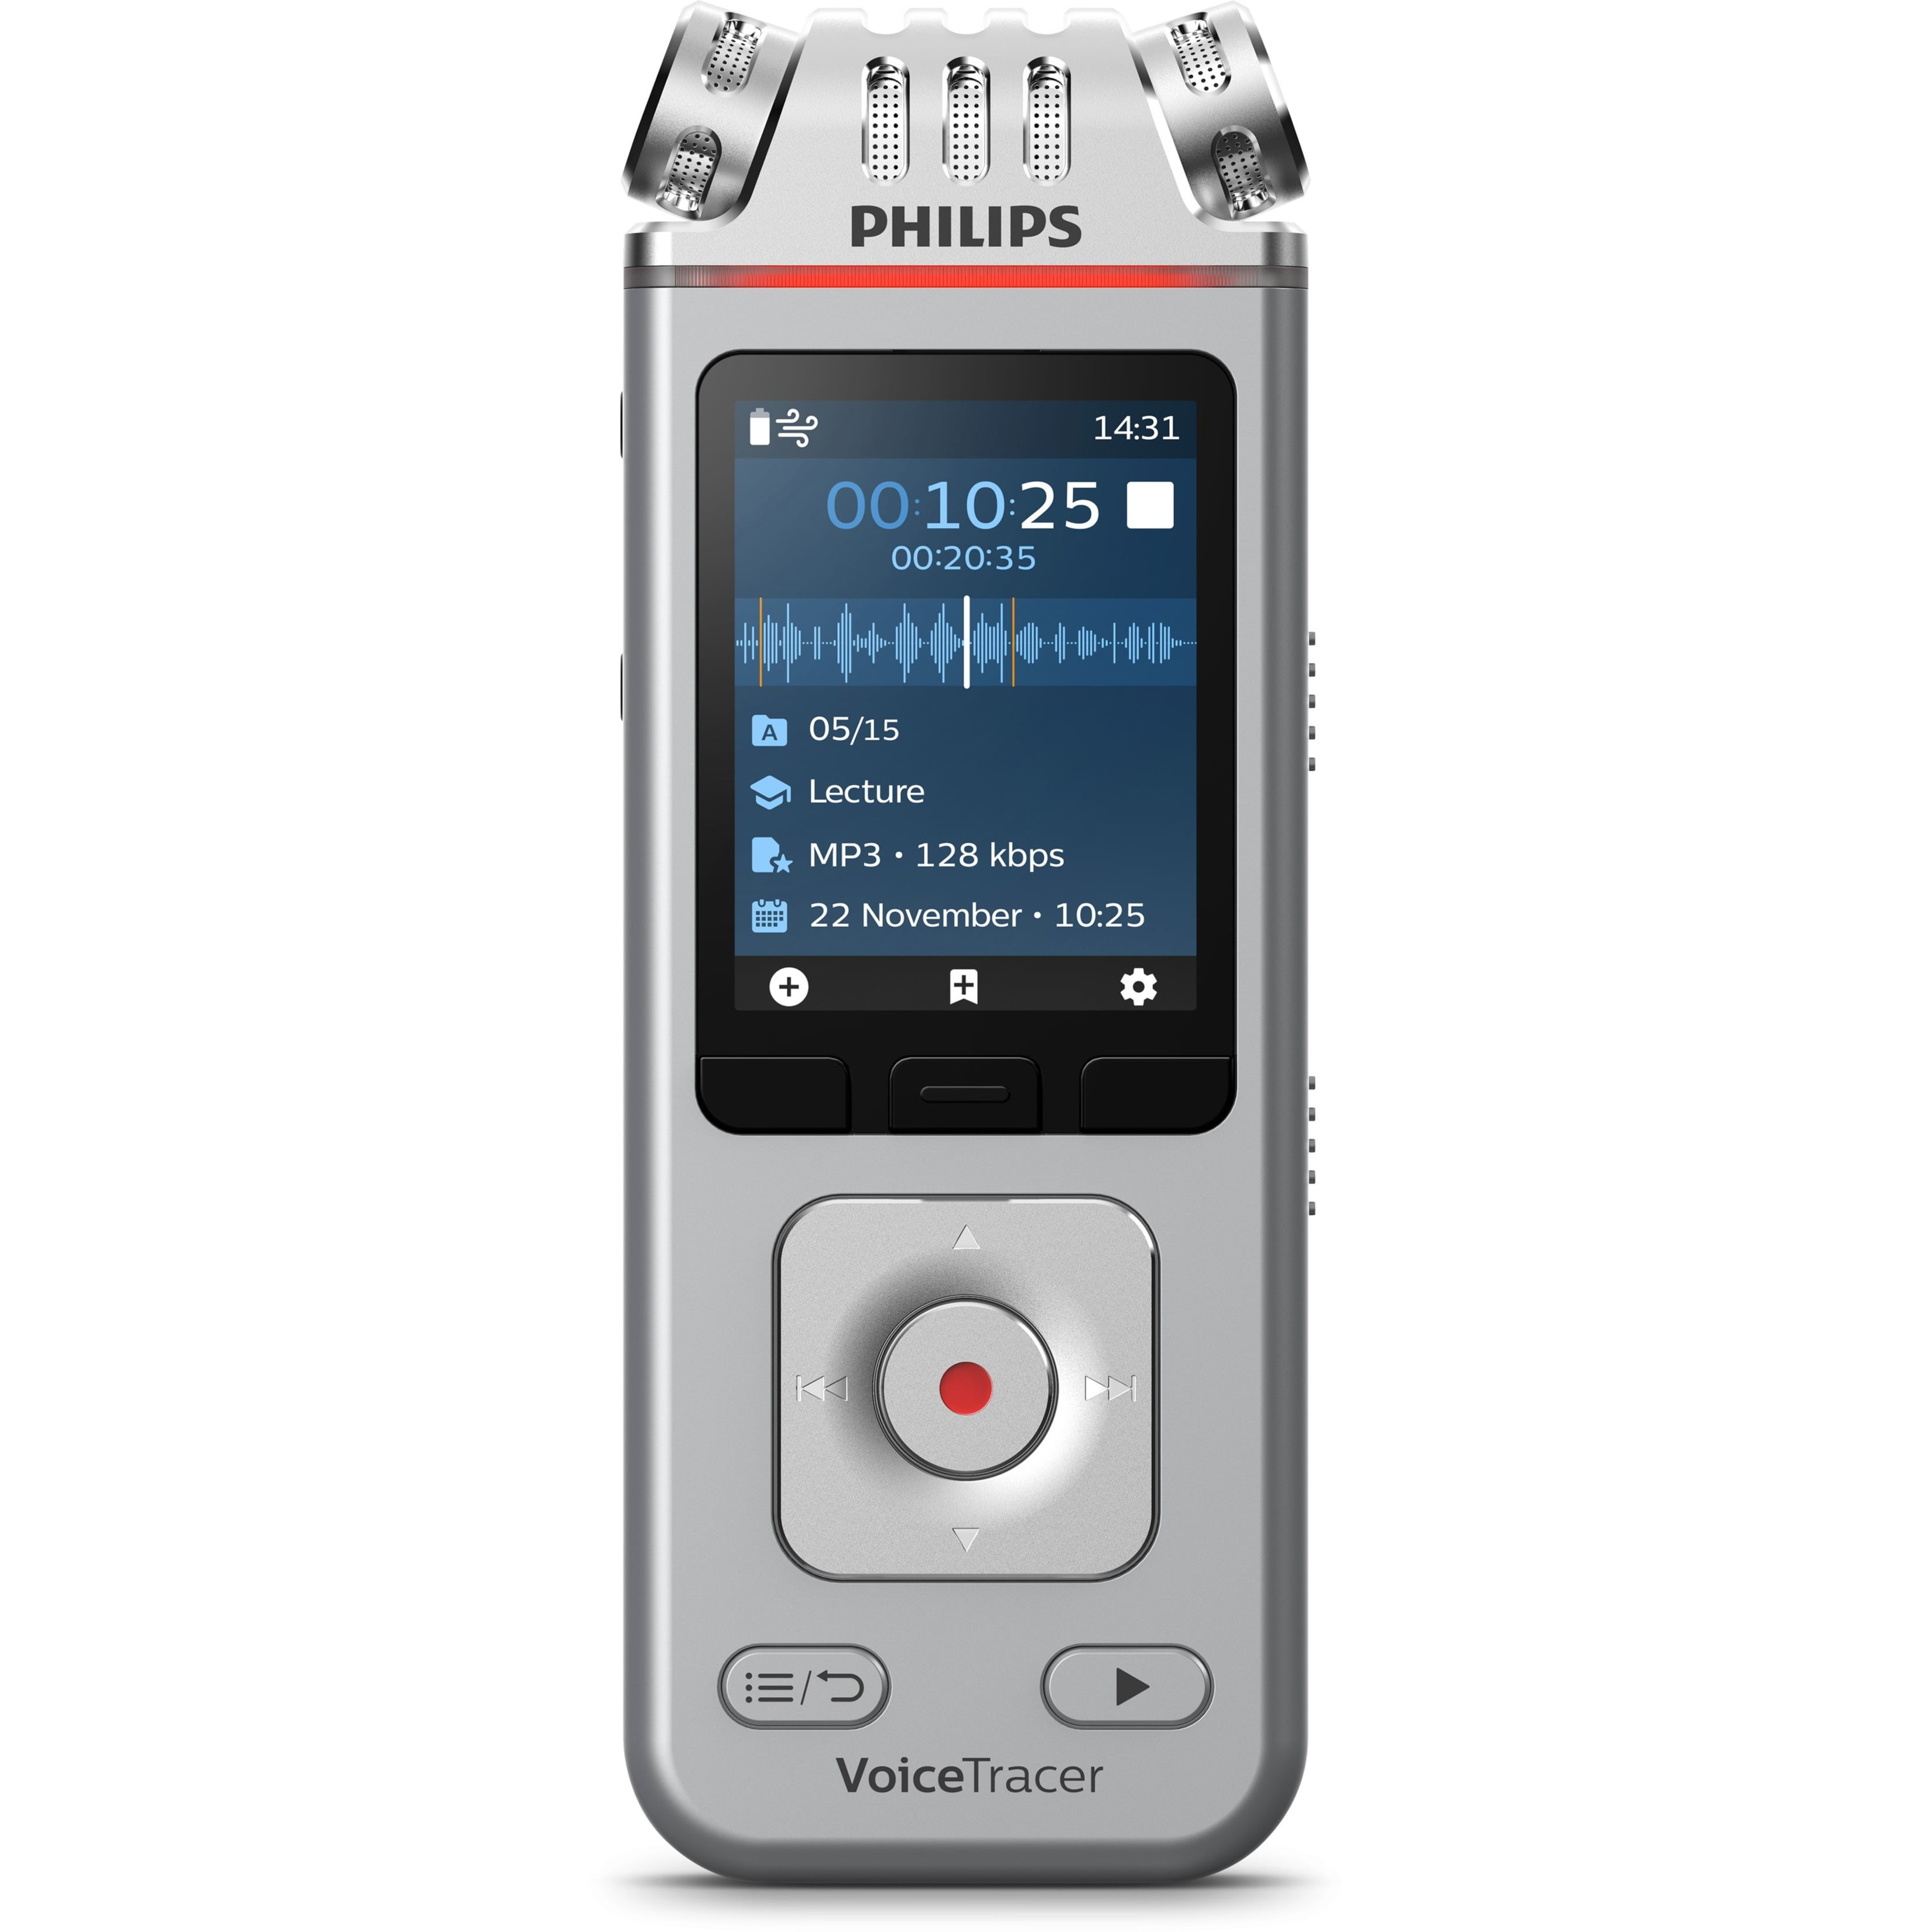 Privileged Mystery gallop Philips 8GB dgtal Voice Recorder with Volume Control, Silver, DVT4110 -  Walmart.com